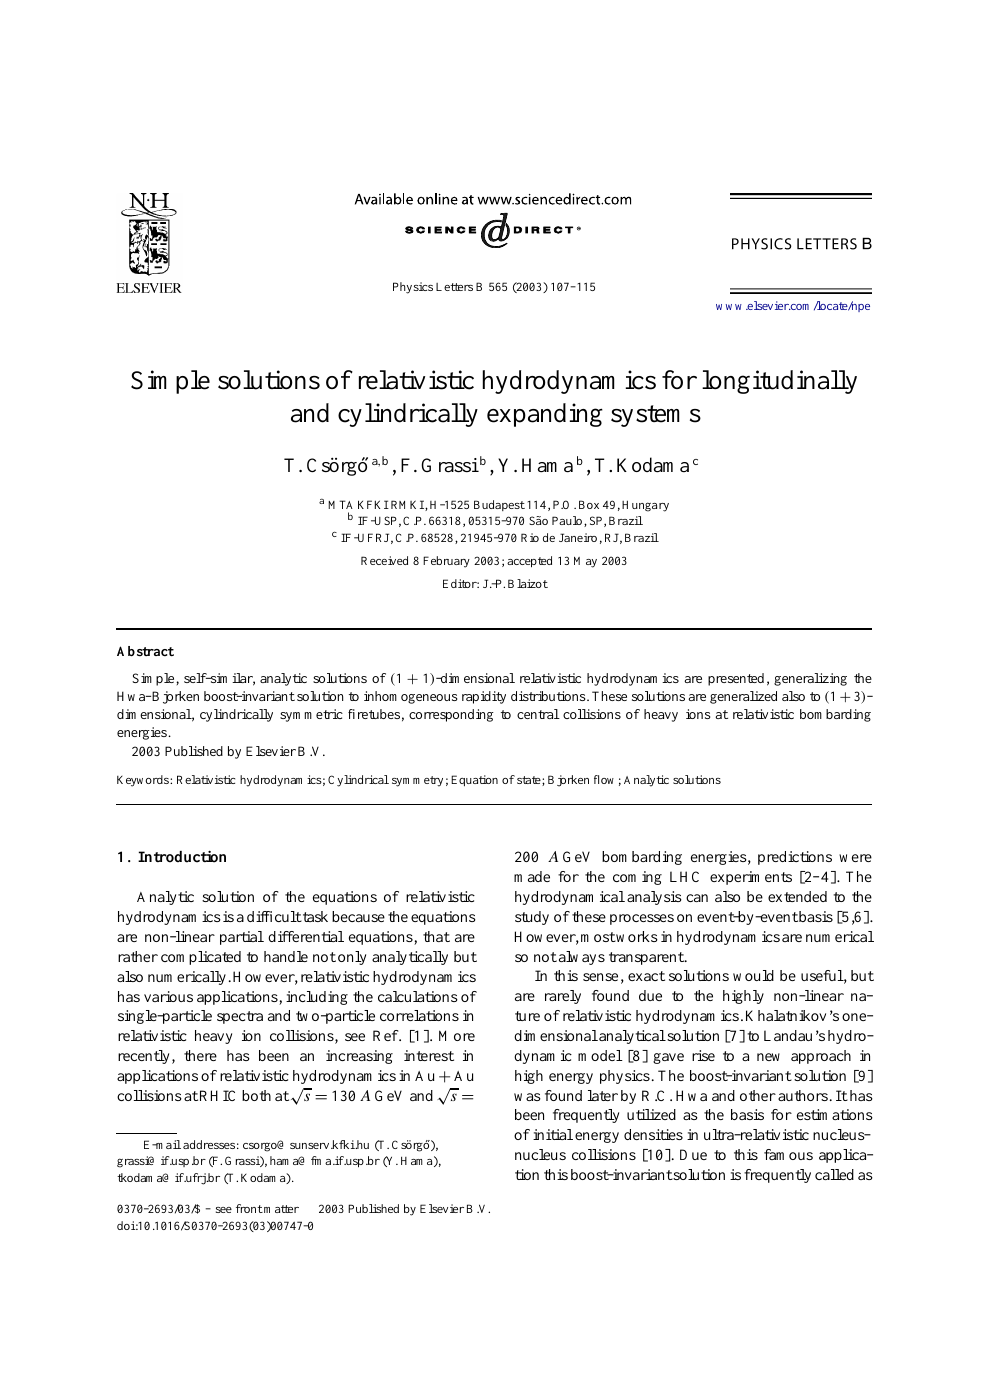 Simple Solutions Of Relativistic Hydrodynamics For Longitudinally And Cylindrically Expanding Systems Topic Of Research Paper In Physical Sciences Download Scholarly Article Pdf And Read For Free On Cyberleninka Open Science Hub